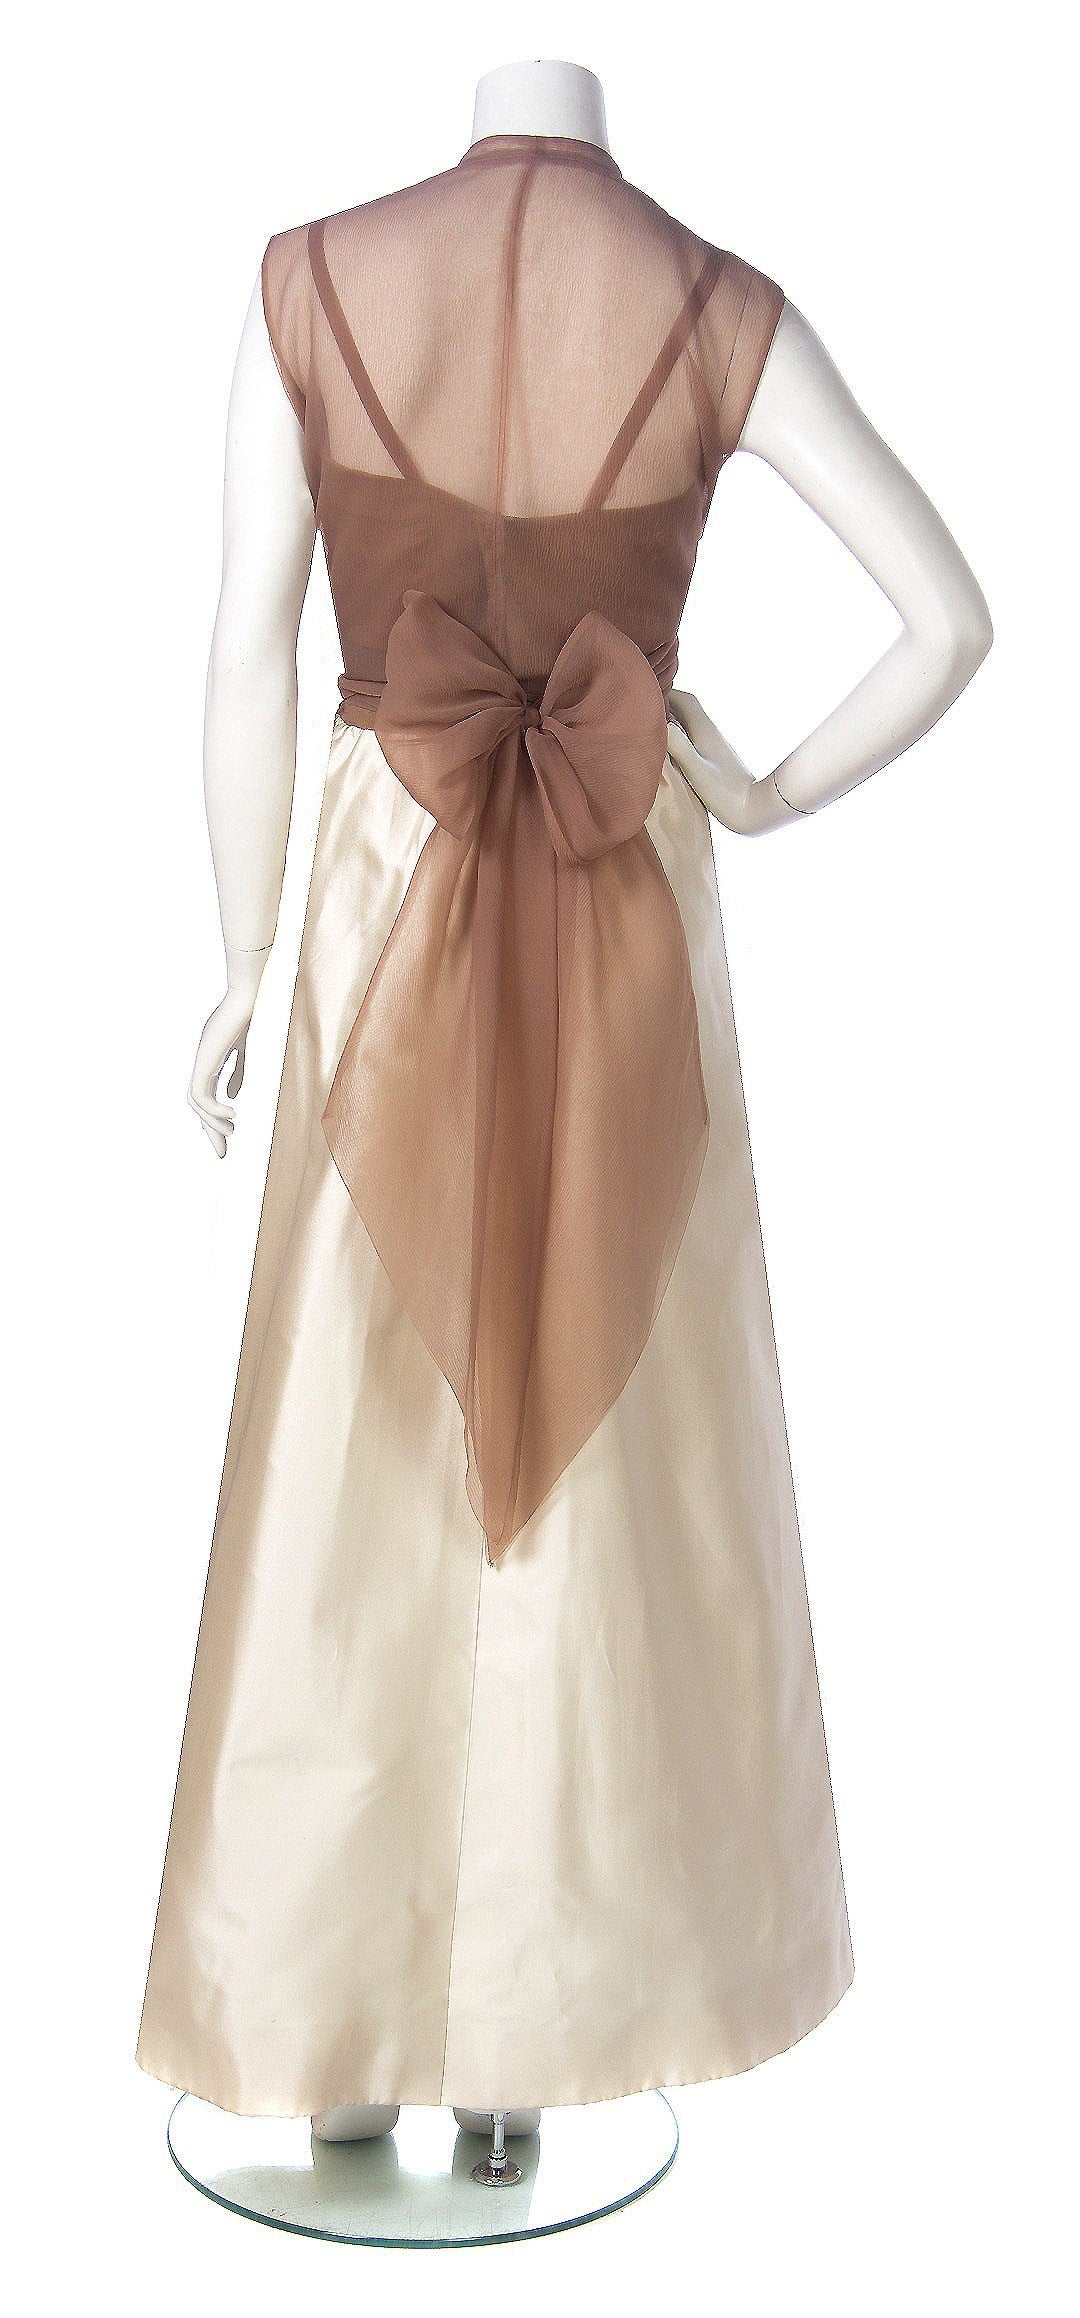 Stunning ivory dupioni-silk & nude crepe-chiffon evening gown from the 1967 Balenciaga collection. Cristobal Balenciaga began his life's work in fashion at a very young age. It is fabled that the Marquesa de Casa Torres, who was so taken with his